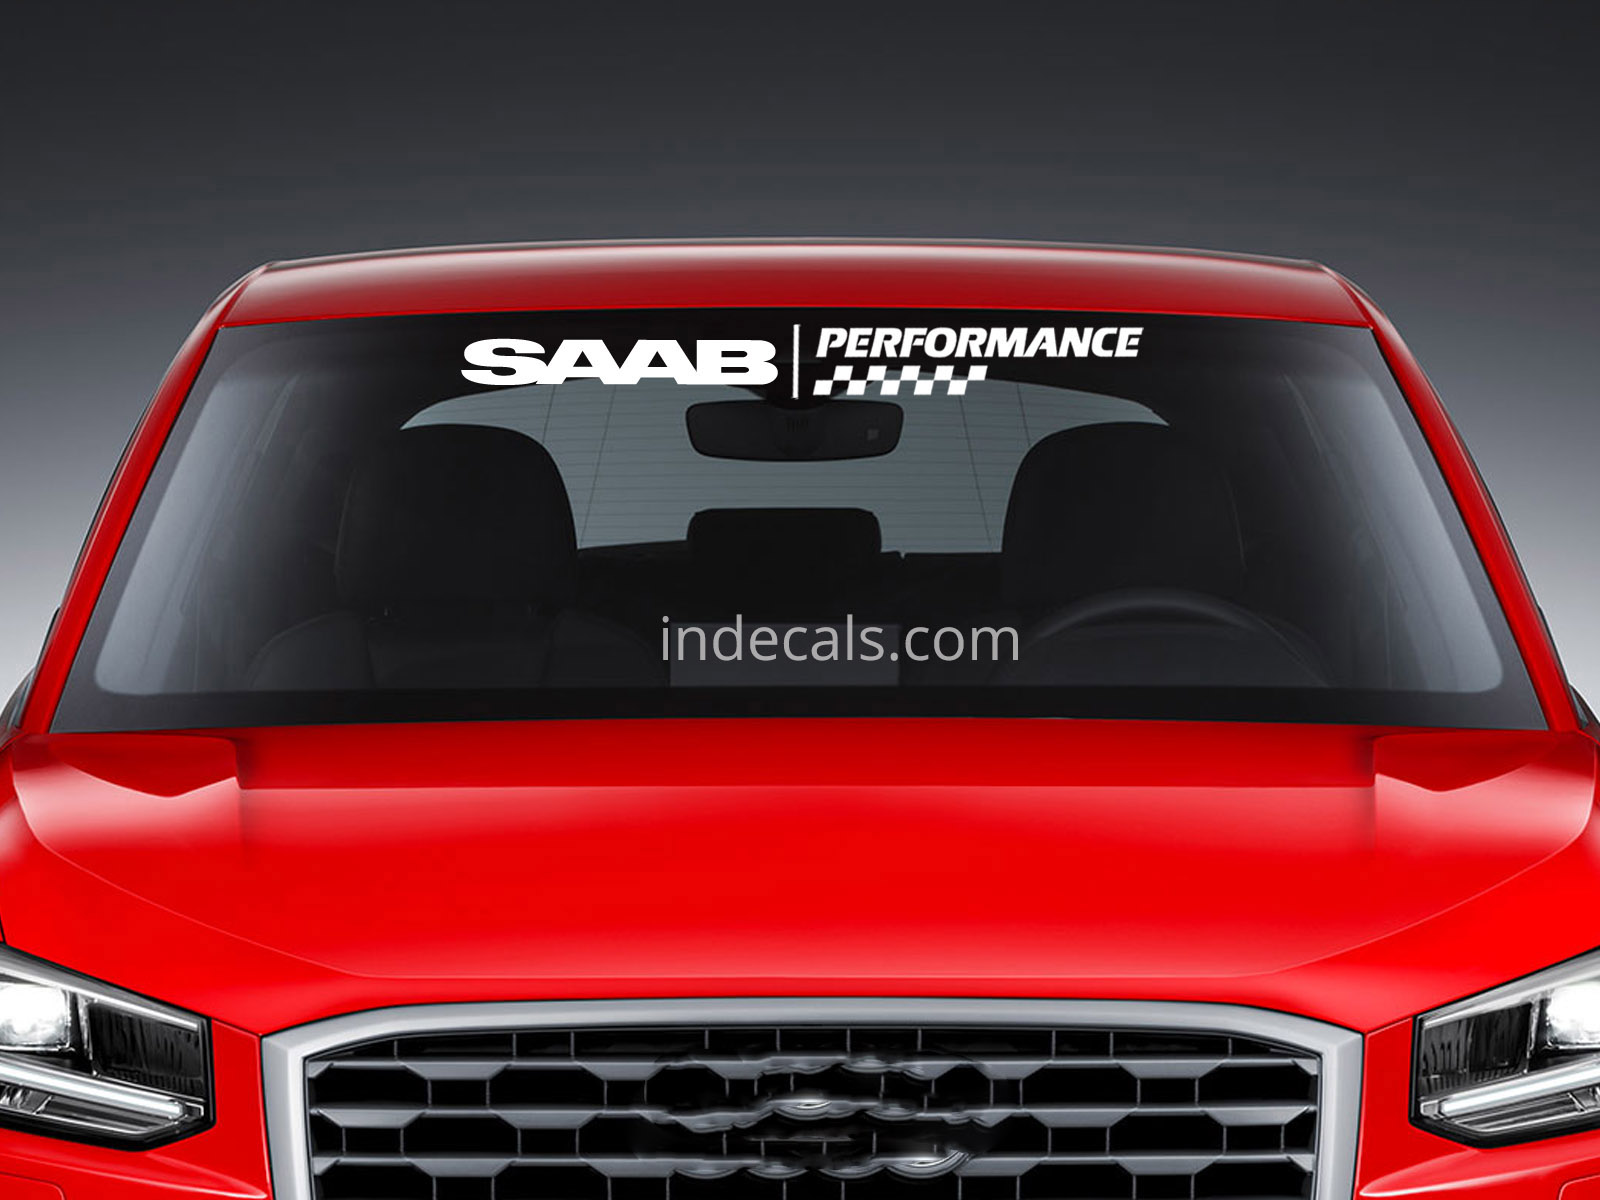 1 x Saab Performance Sticker for Windshield or Back Window - White